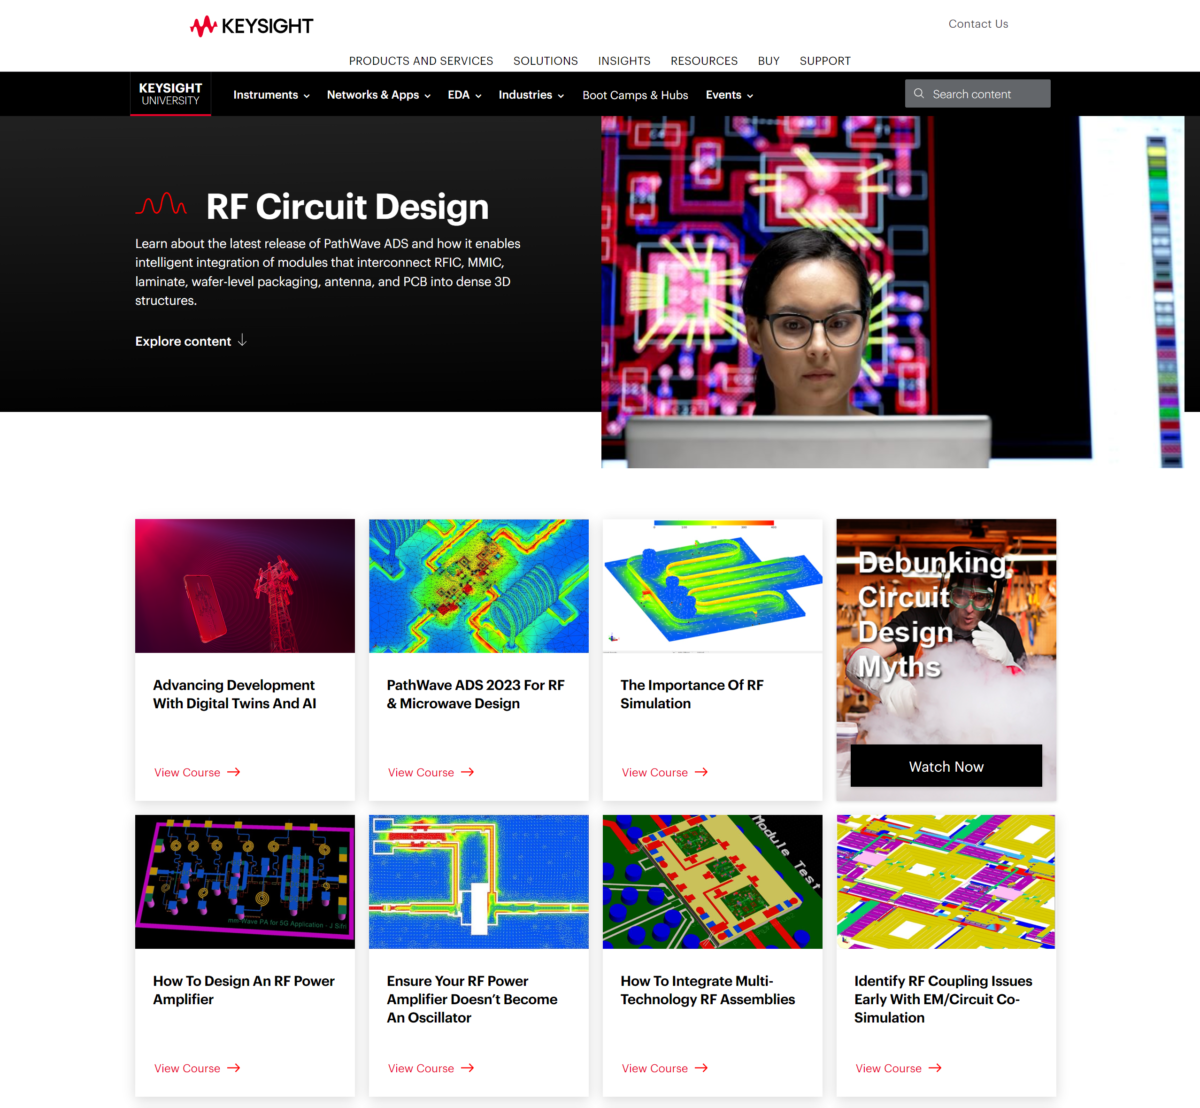 A curated EDA experience for RF Circuit Design by Keysight